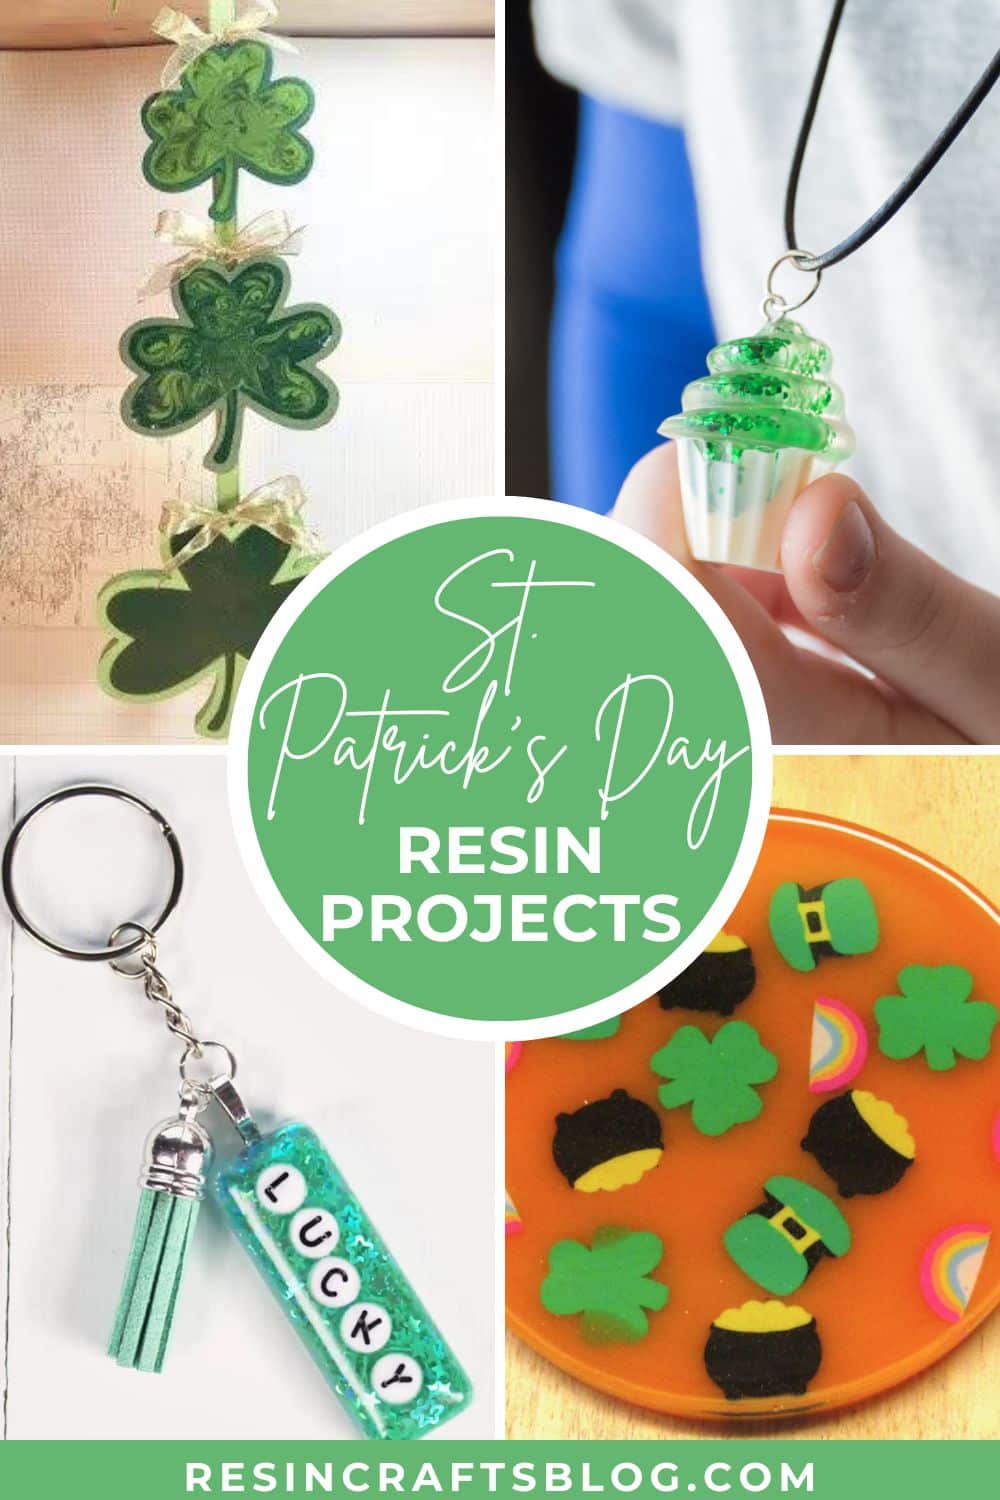 resin projects for st patricks day via @resincraftsblog